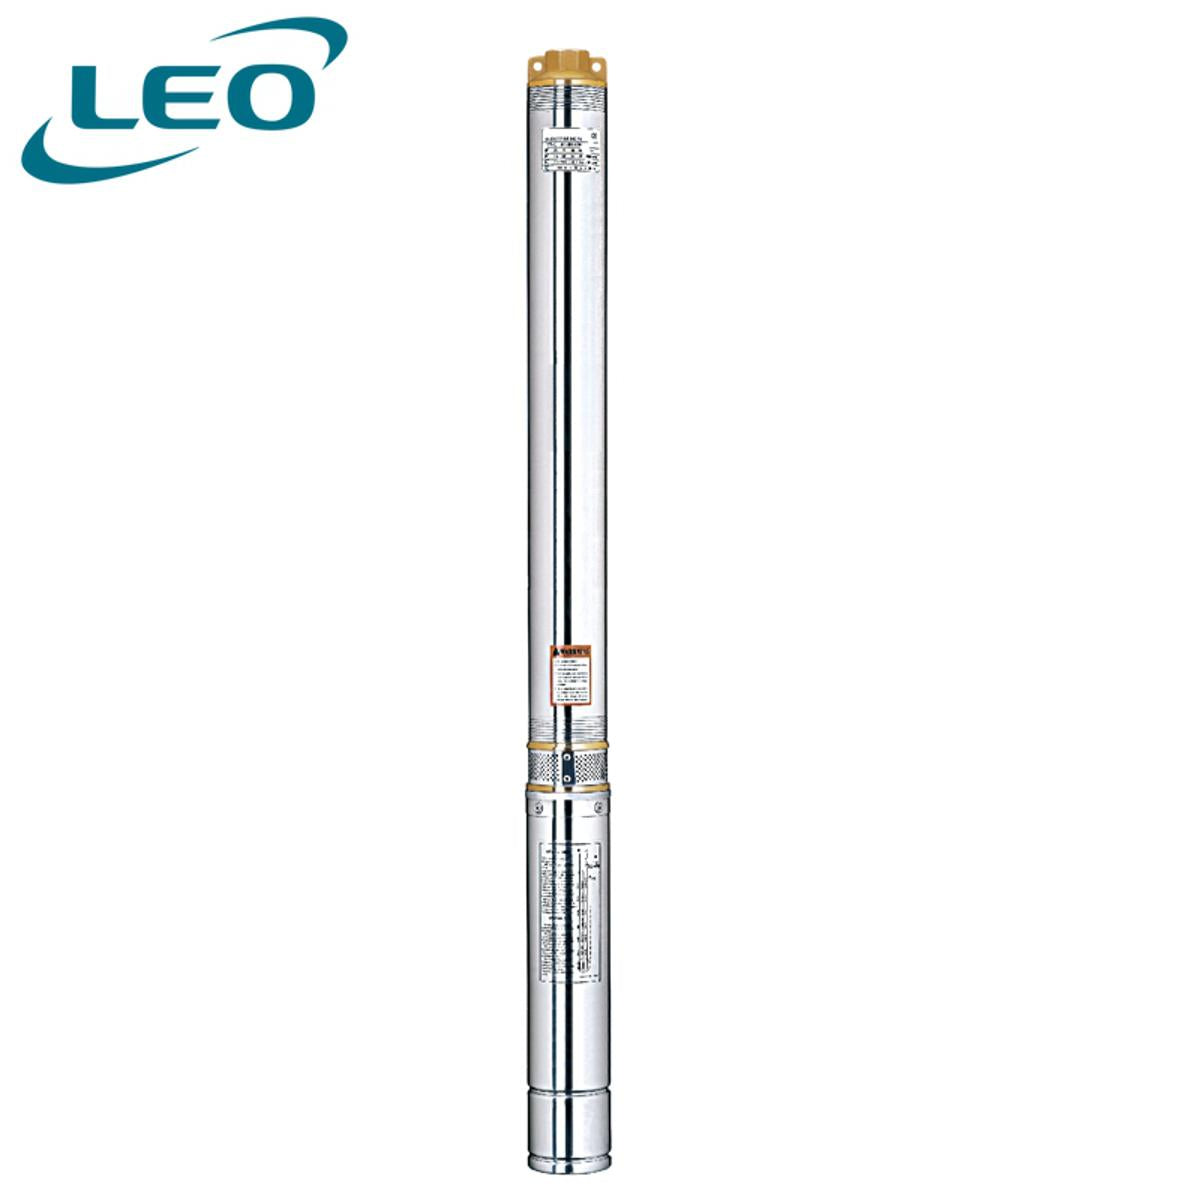 LEO - 4XRM-3-13-0.75 - 750 W - 1 HP  Stainless Steel Clean Water Deep Well - Bore Hole Submersible Pump With Controller- European STANDARD